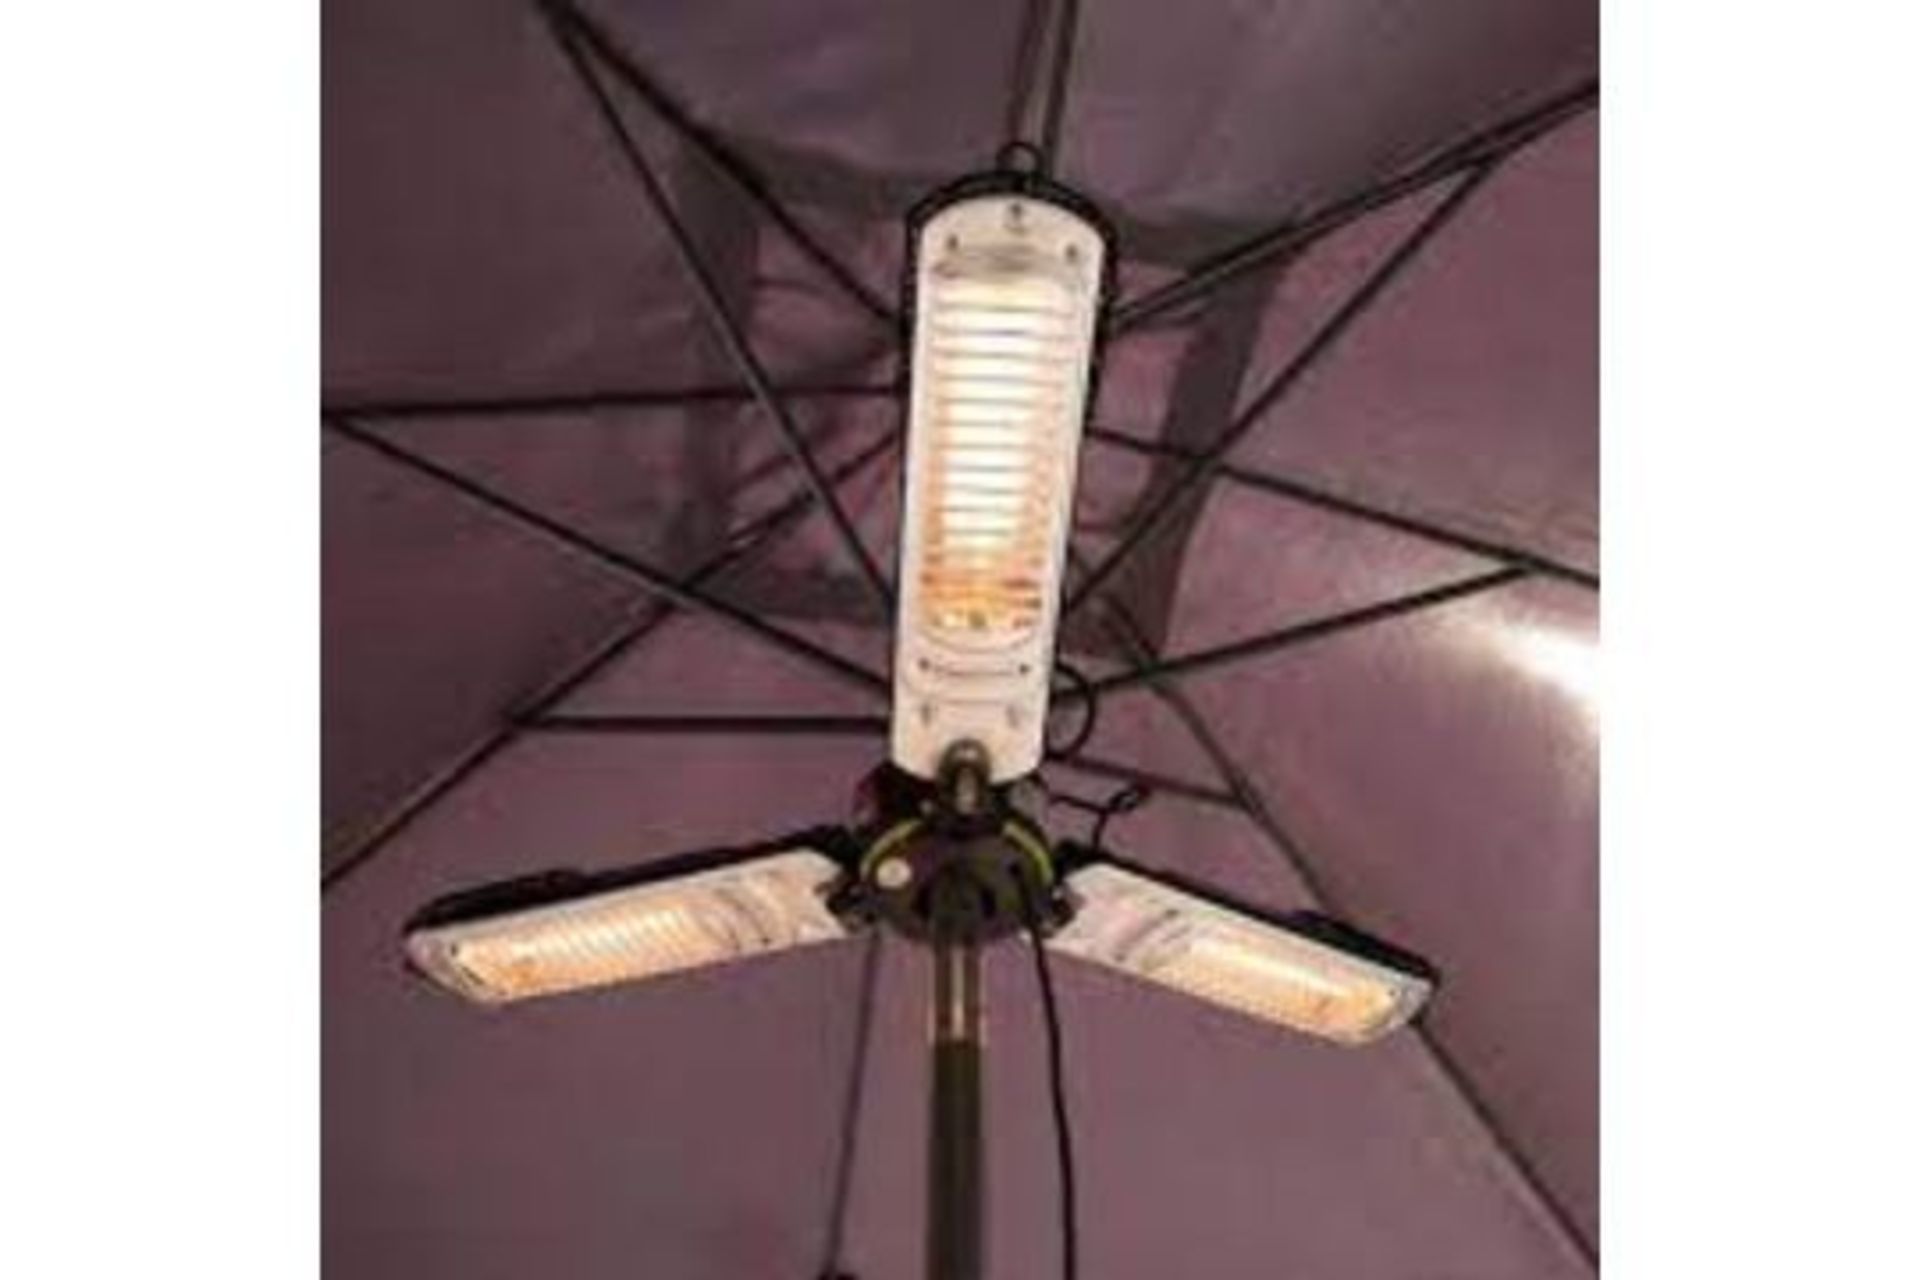 Brand New The Sunred Heater Parasol RRP £299 2000W is a high quality and efficient outdoor